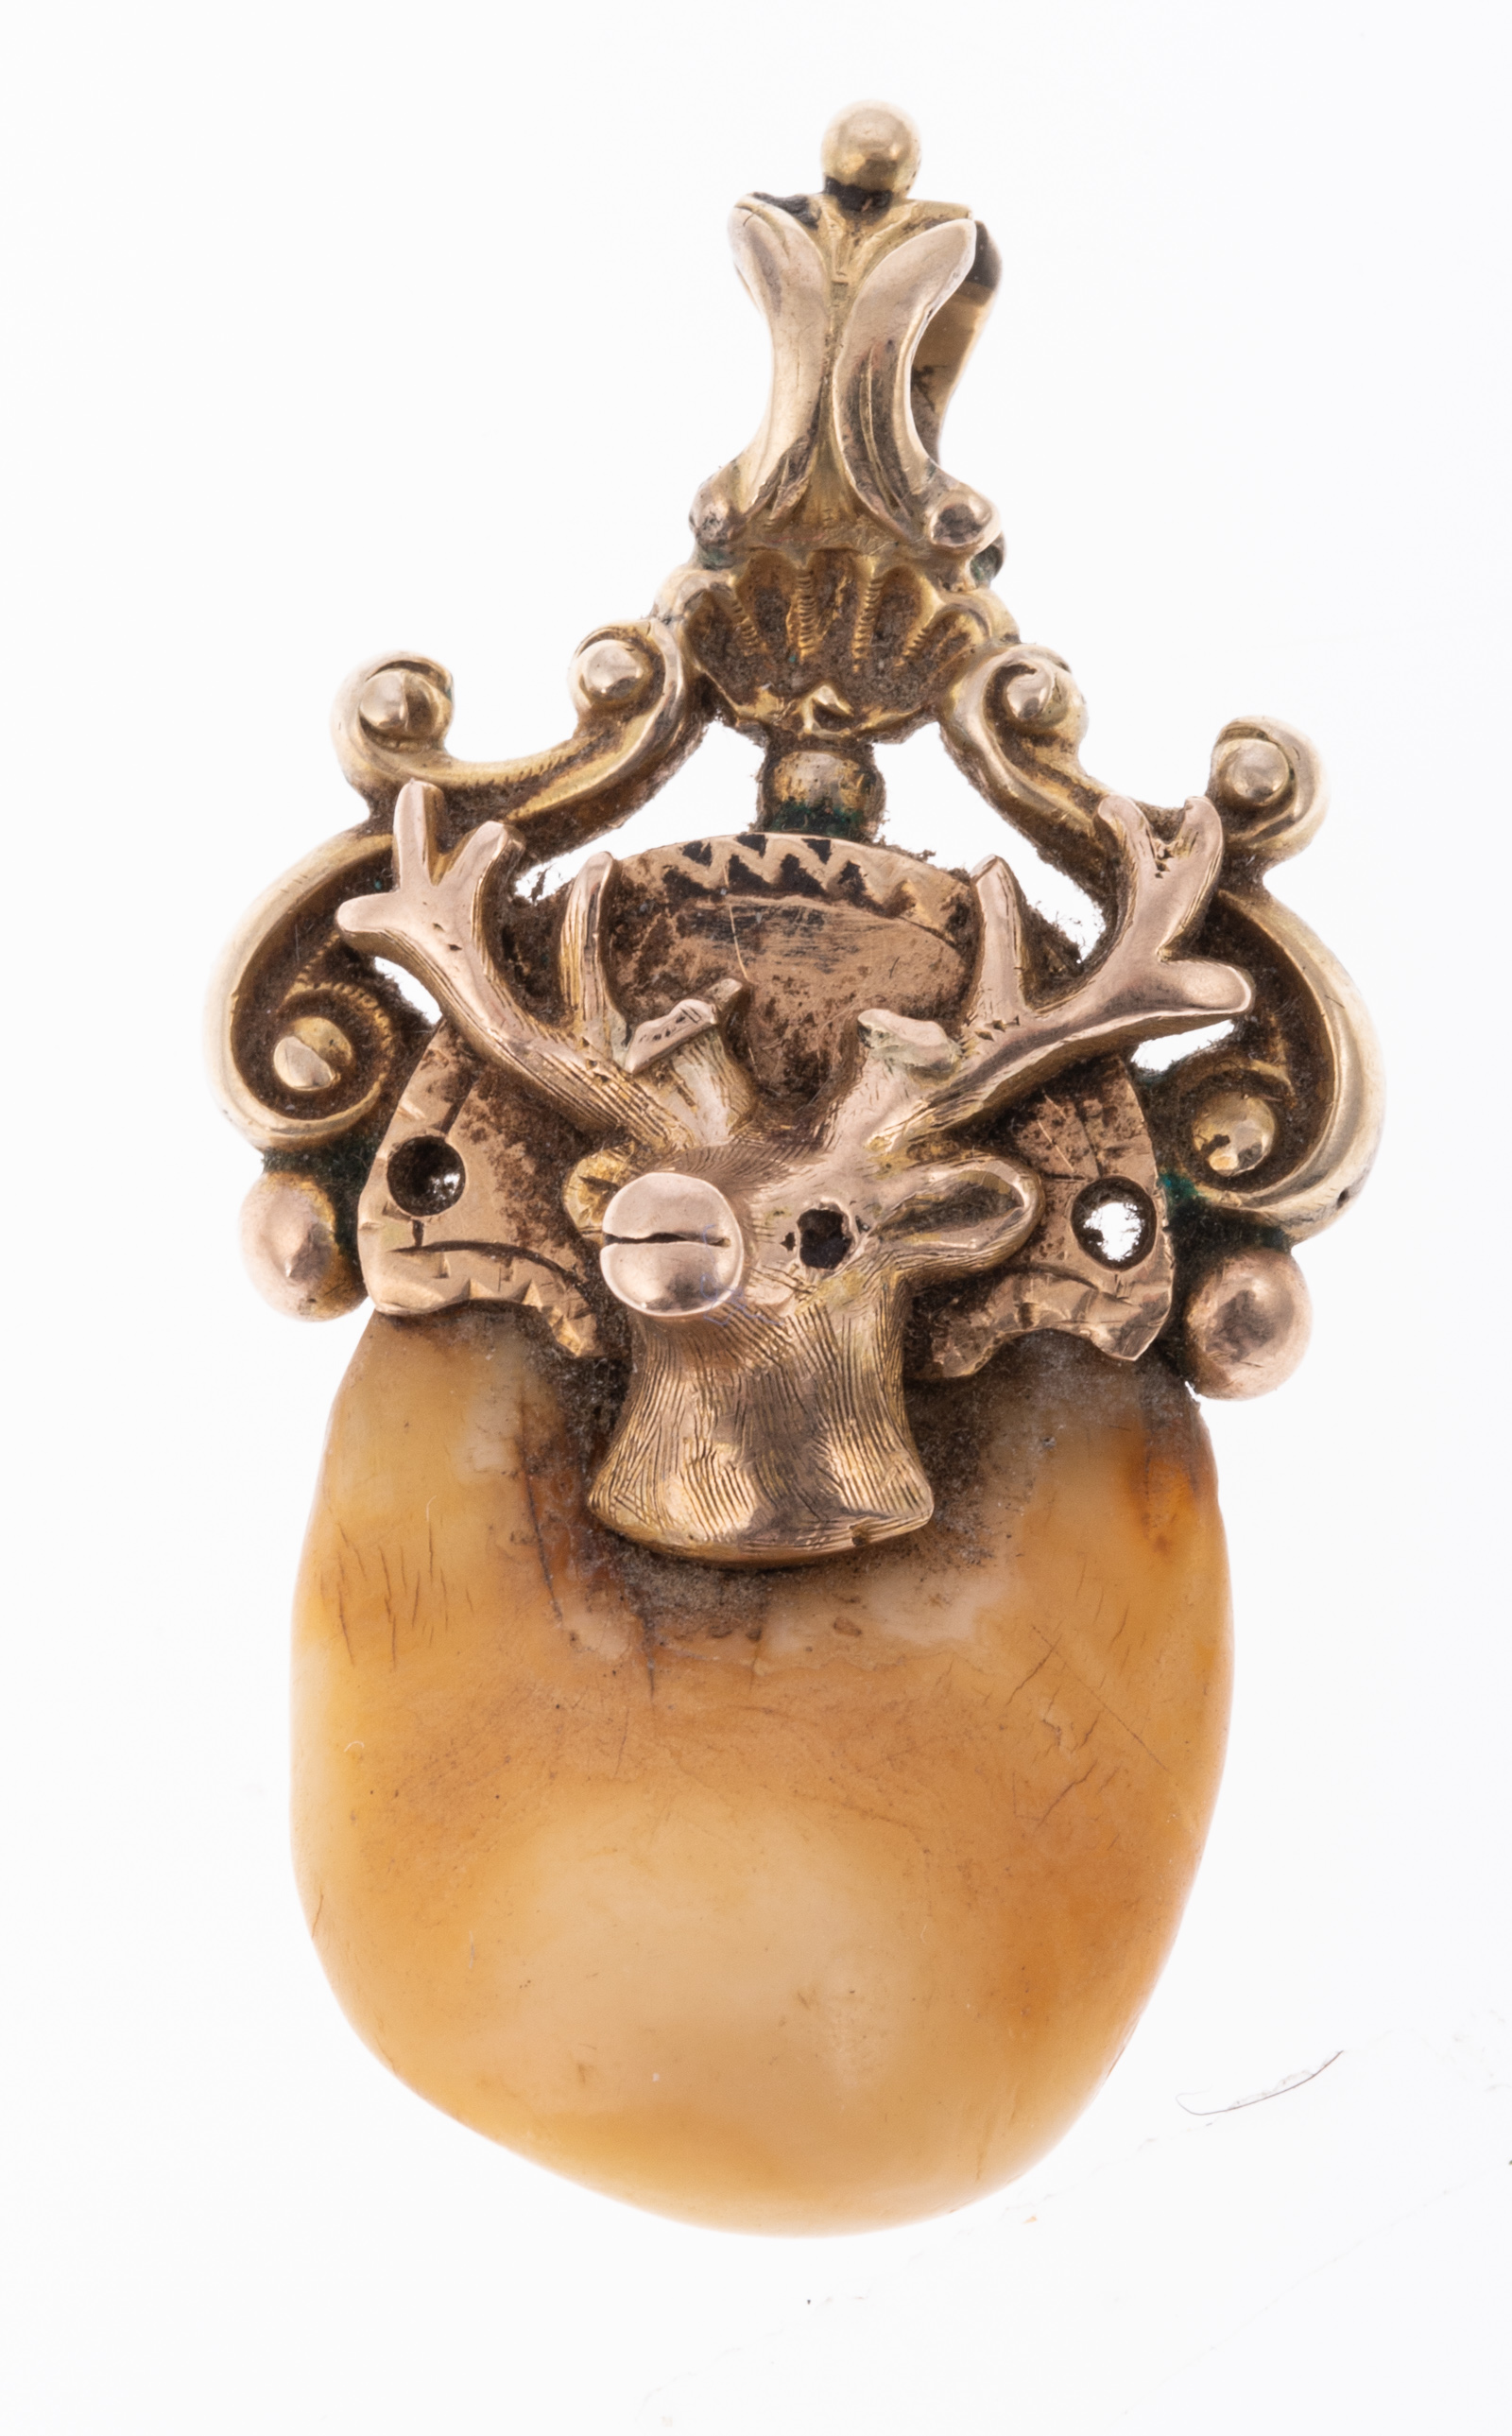 ELKS TOOTH PENDANT B P O E Marked 2897a6